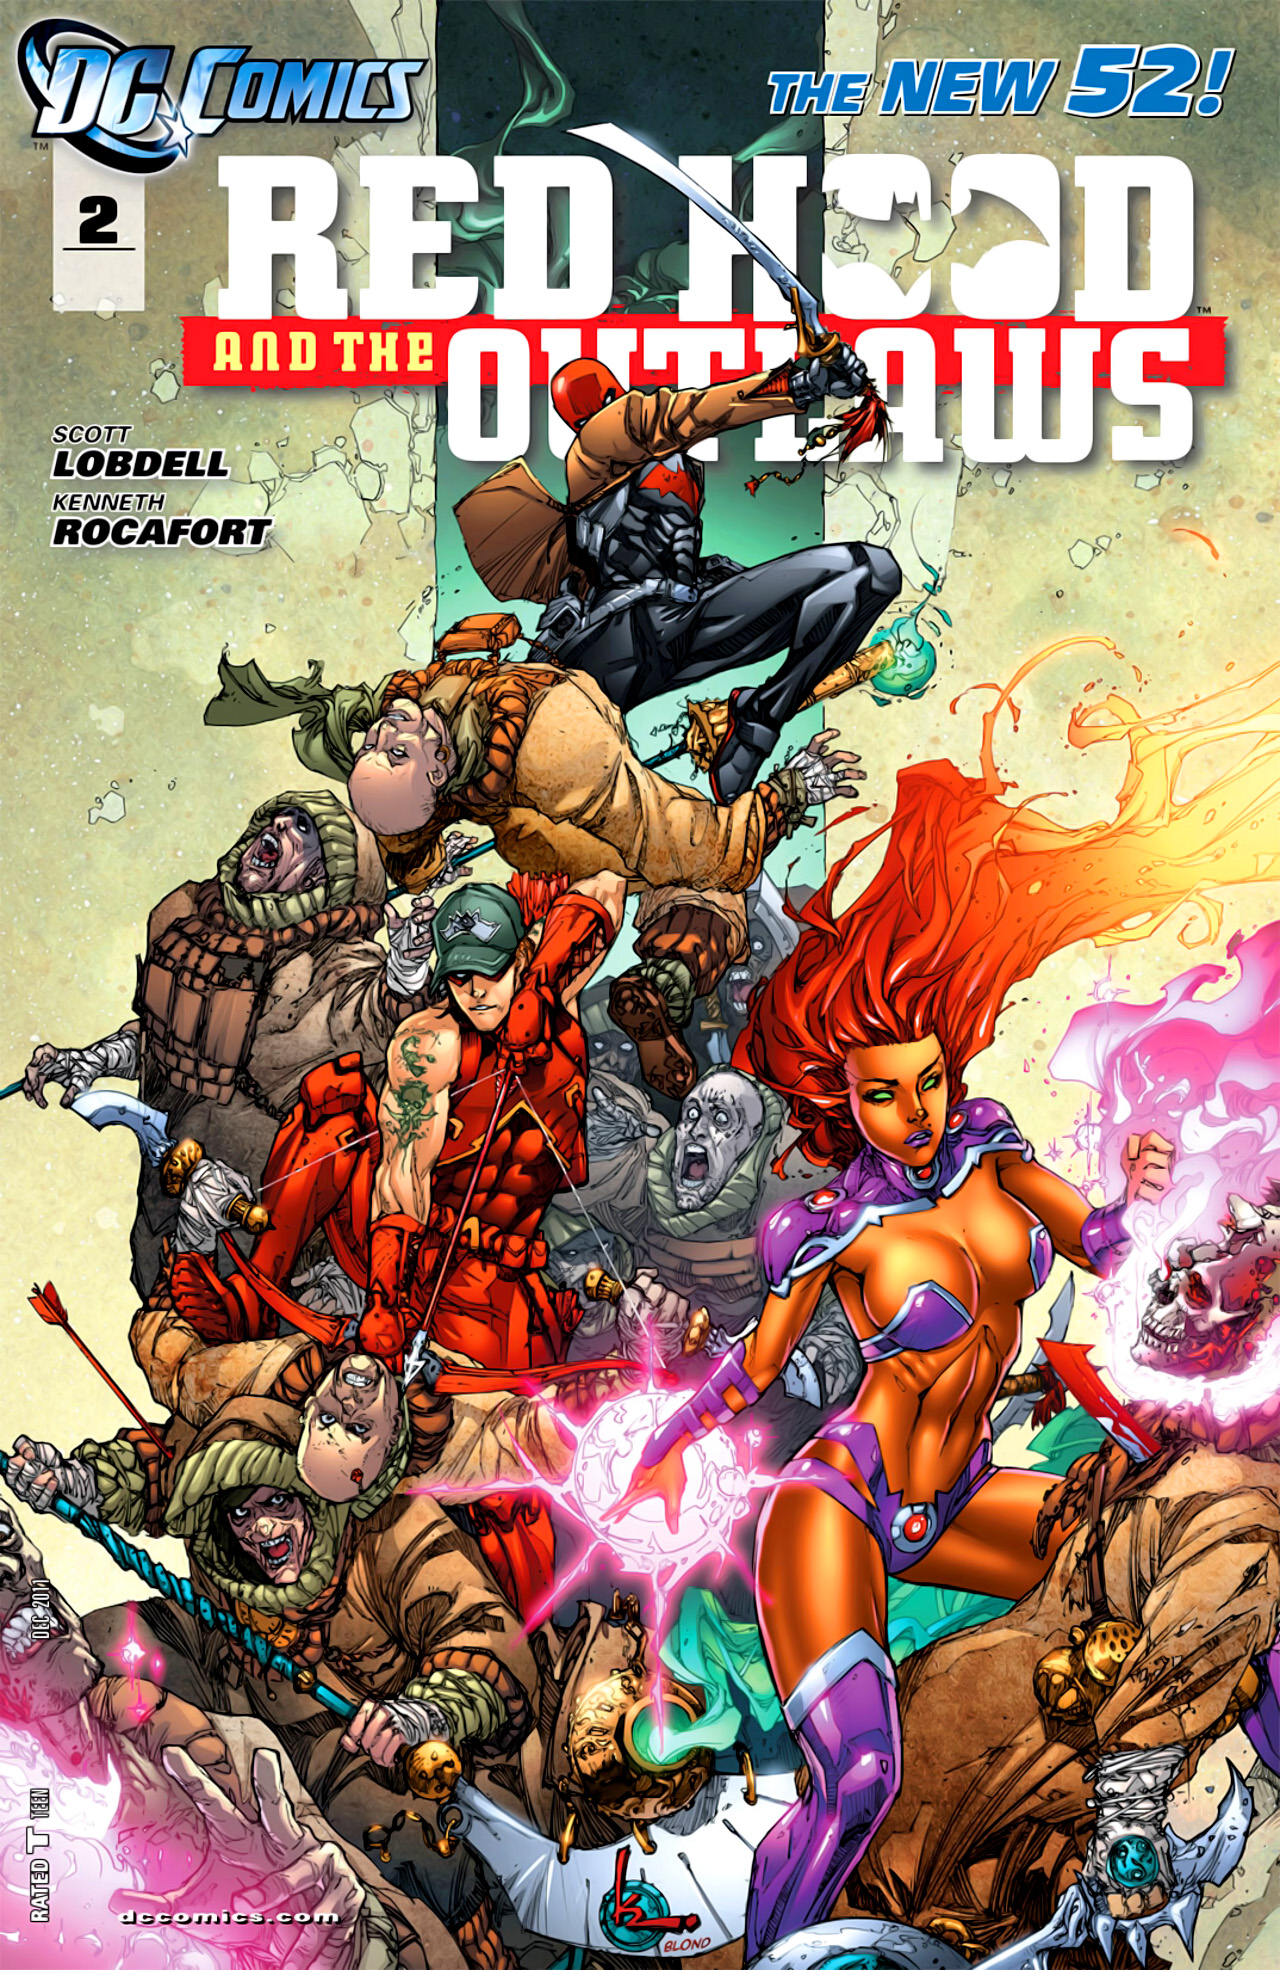 Red Hood and the Outlaws Vol. 1 #2